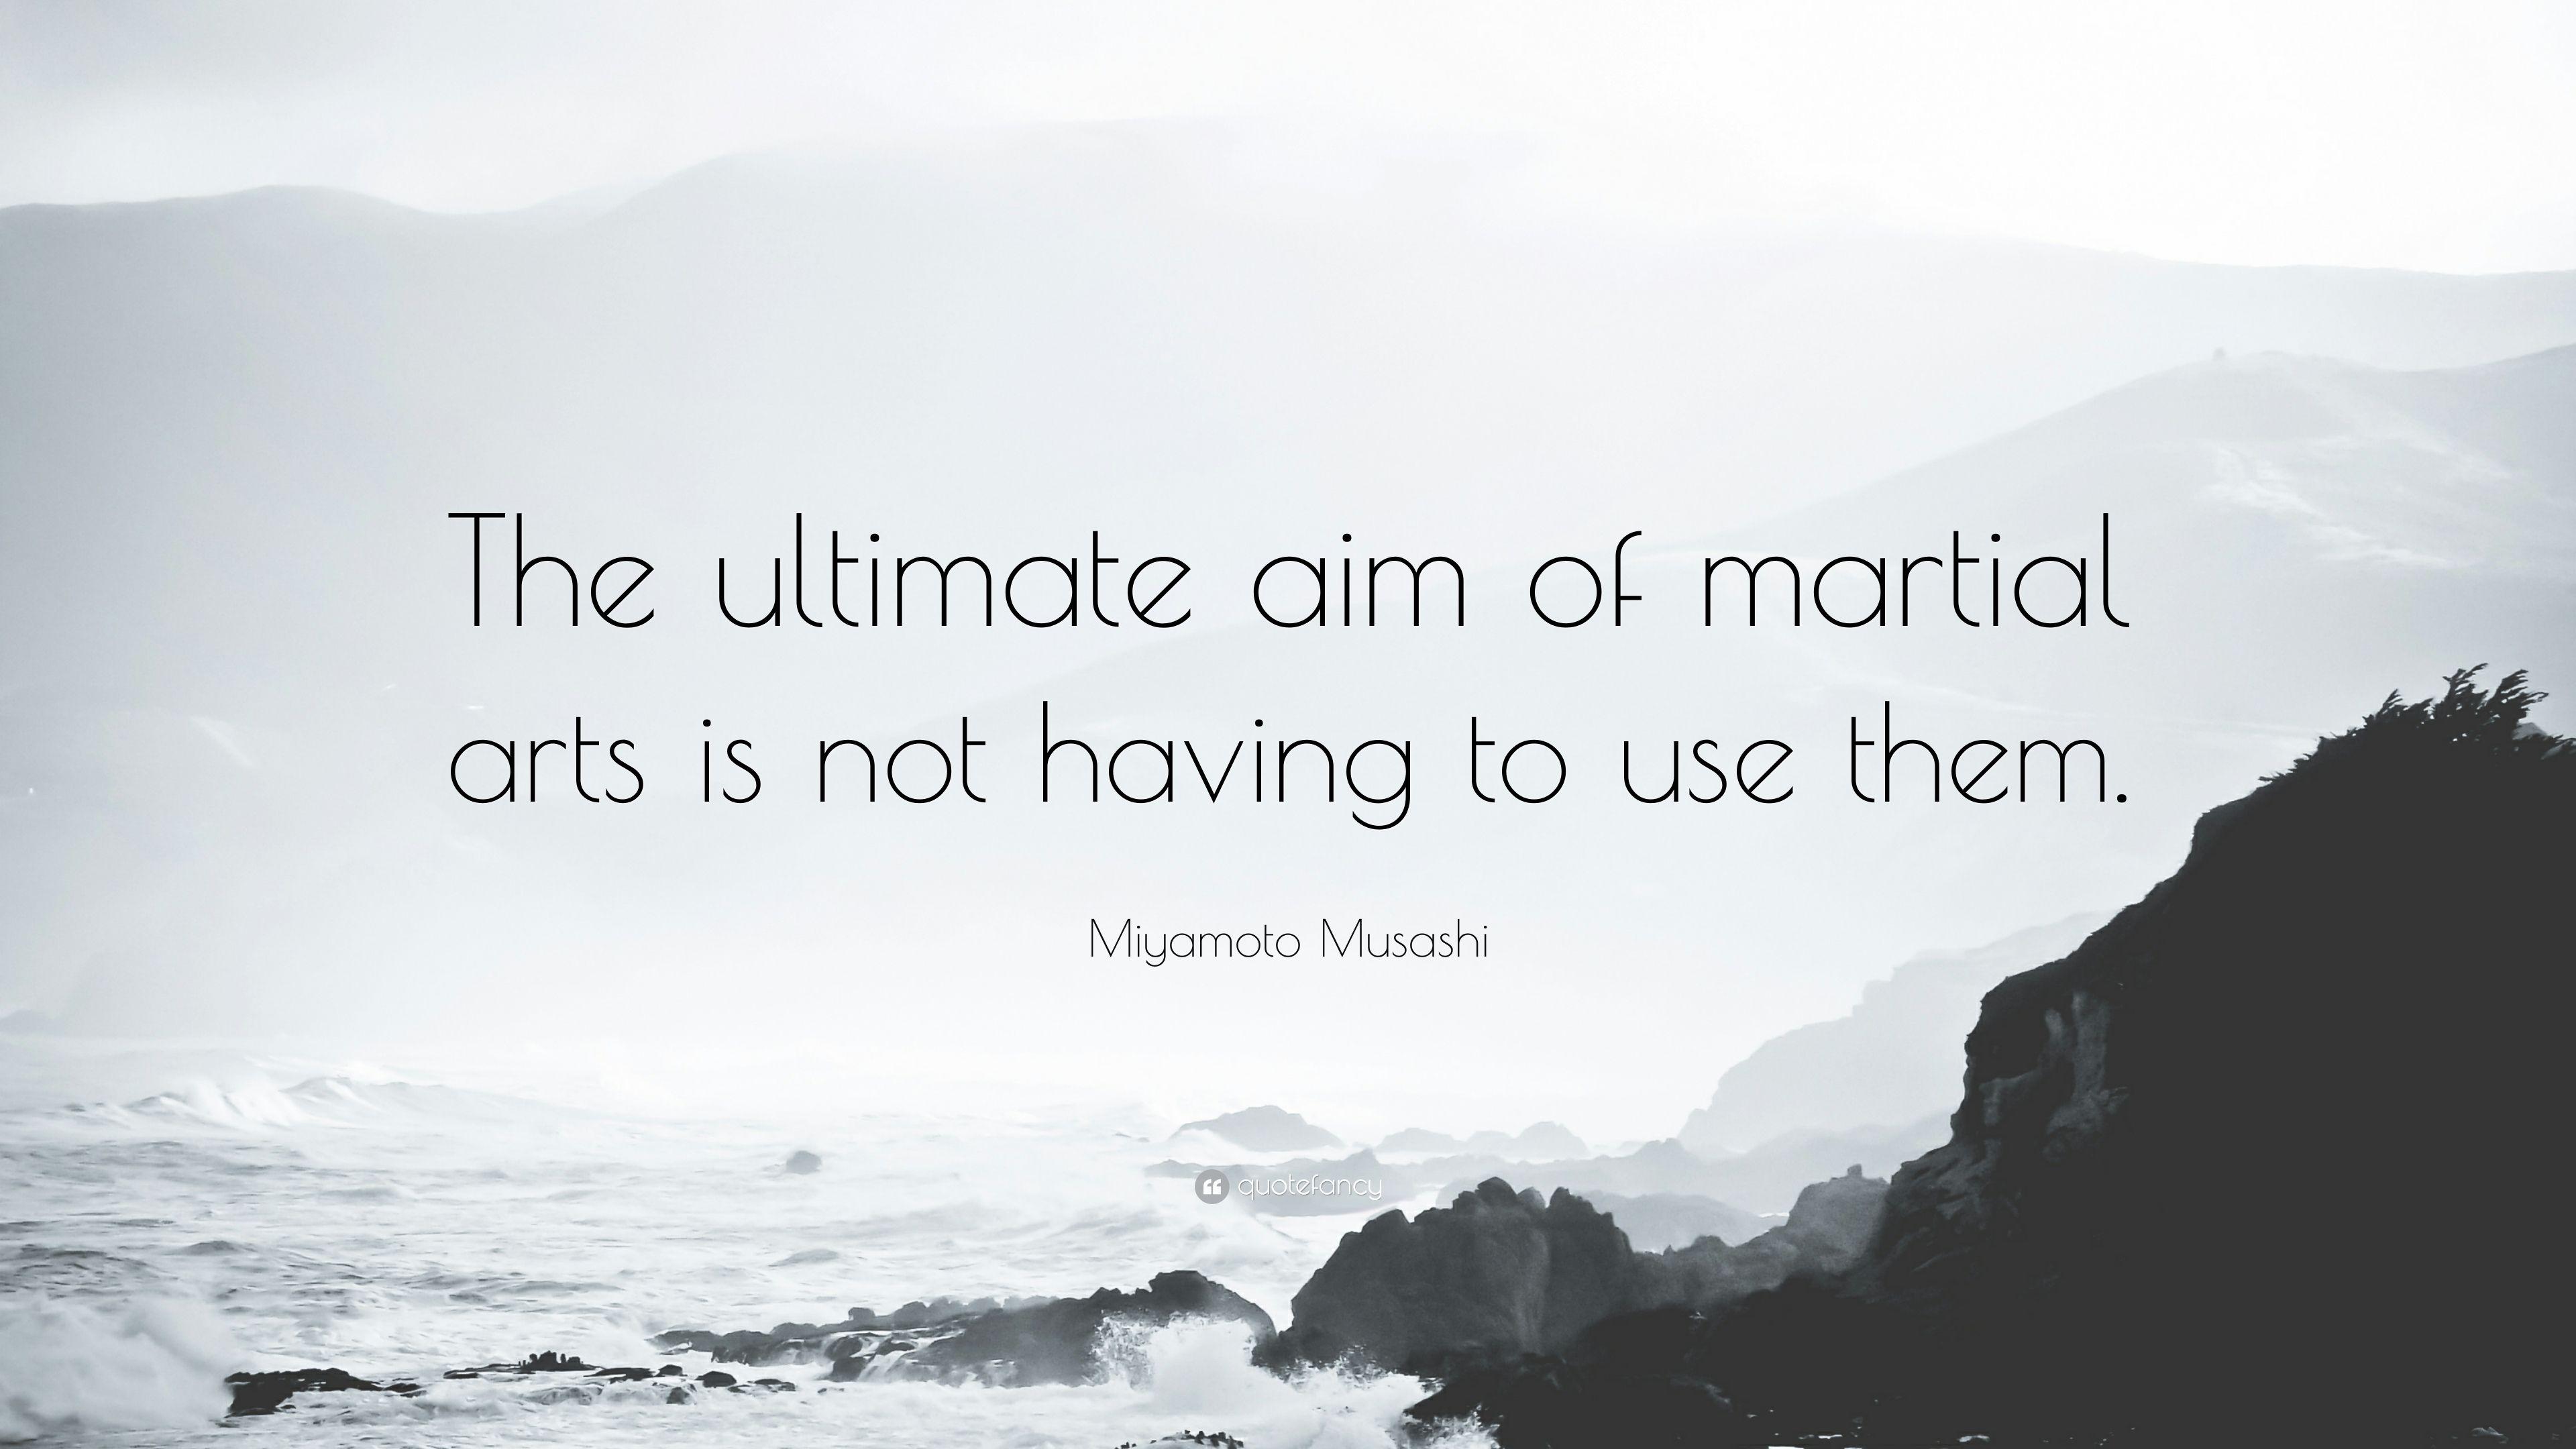 Miyamoto Musashi Quote: “The ultimate aim of martial arts is not